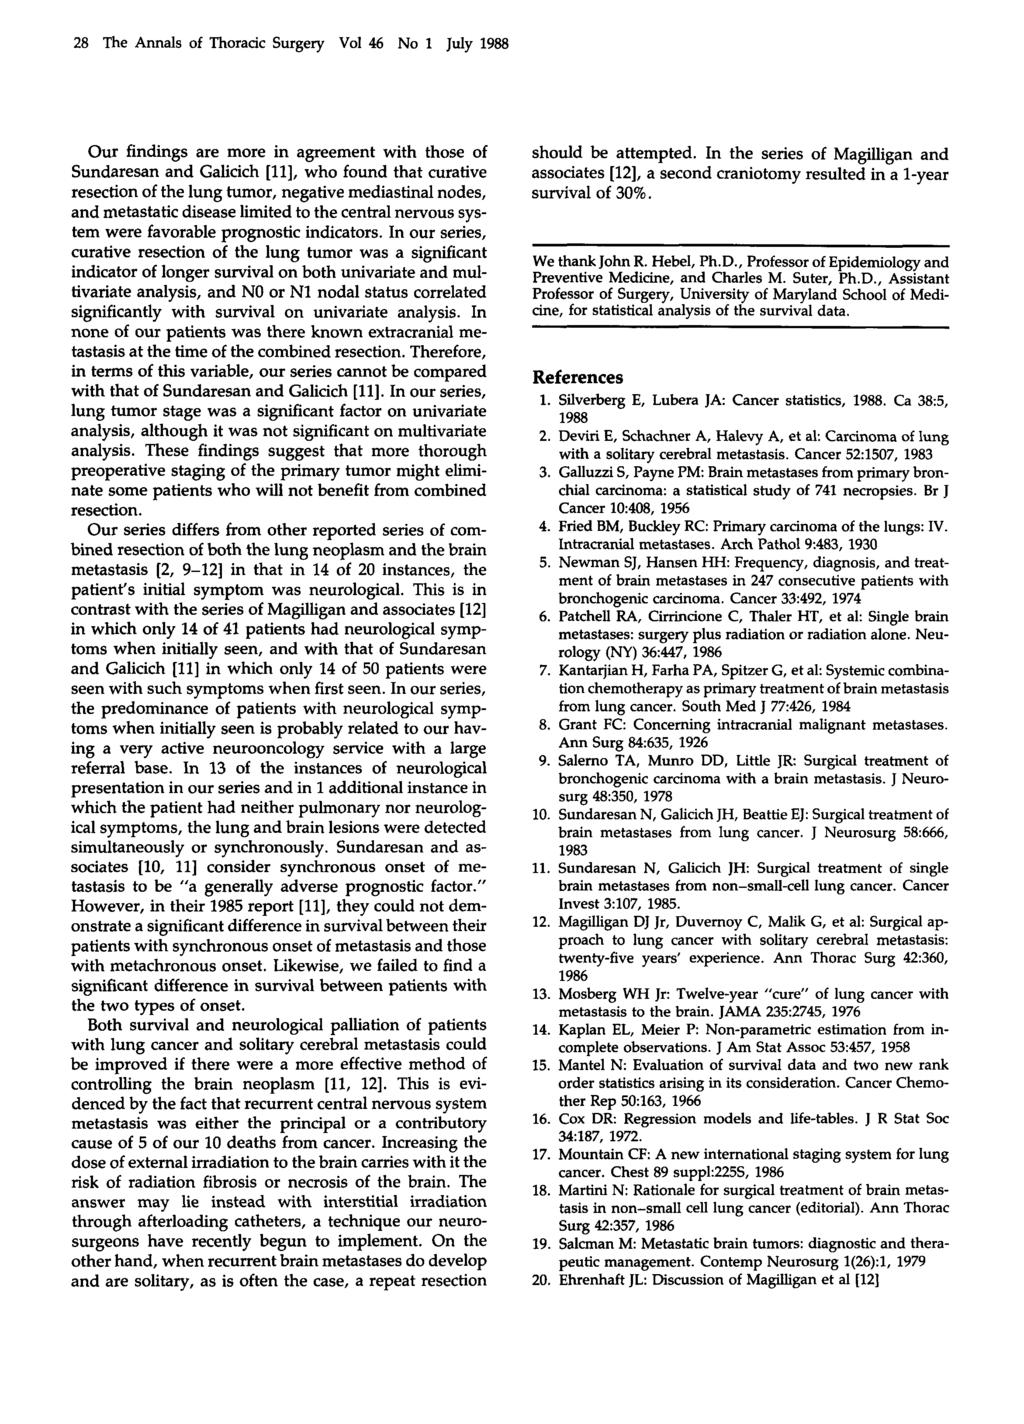 28 The Annals of Thoraac Surgery Vol 46 No 1 July 1988 Our findings are more in agreement with those of Sundaresan and Galicich [ll], who found that curative resection of the lung tumor, negative